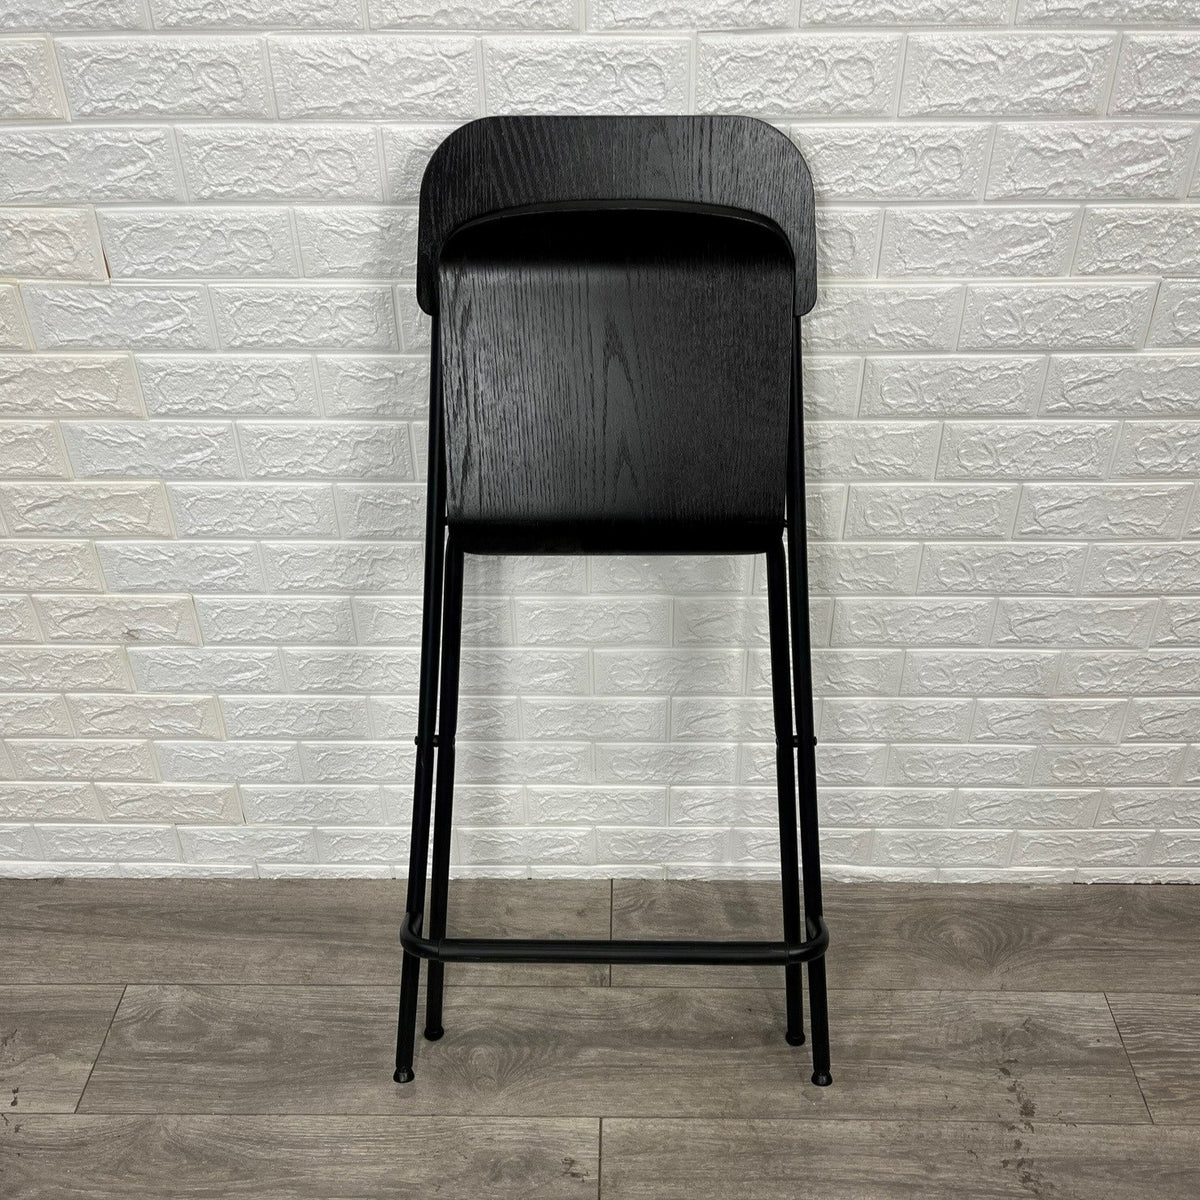 Pre-Owned Foldable Side Chair - Duckys Office Furniture